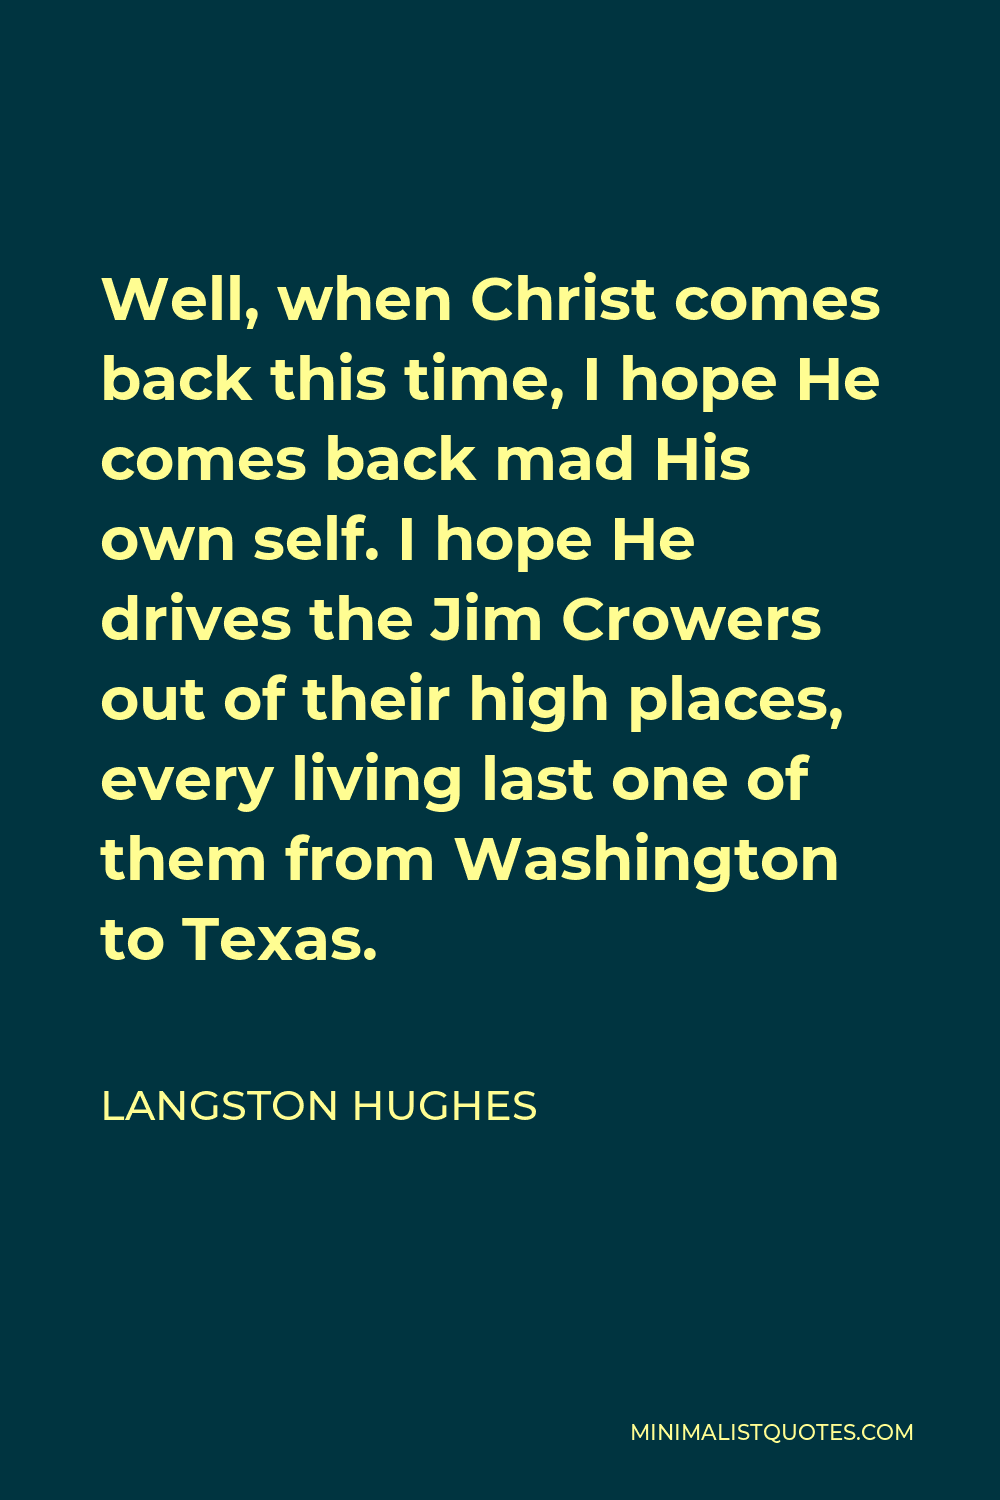 Langston Hughes Quote - Well, when Christ comes back this time, I hope He comes back mad His own self. I hope He drives the Jim Crowers out of their high places, every living last one of them from Washington to Texas.